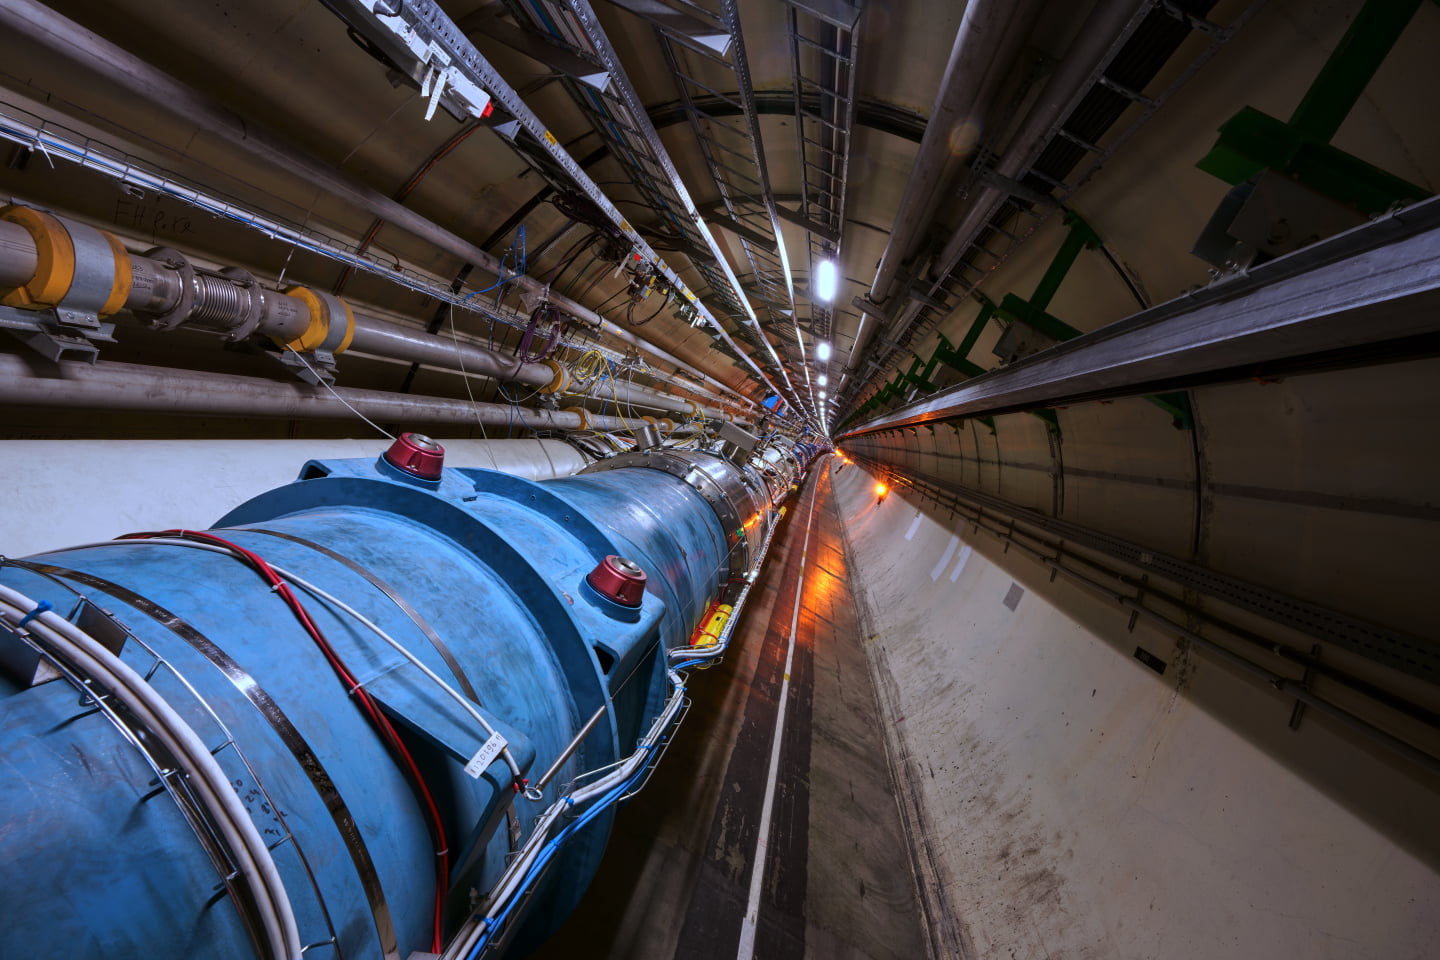 LHC - Large Hadron Collider for discovering God Particle